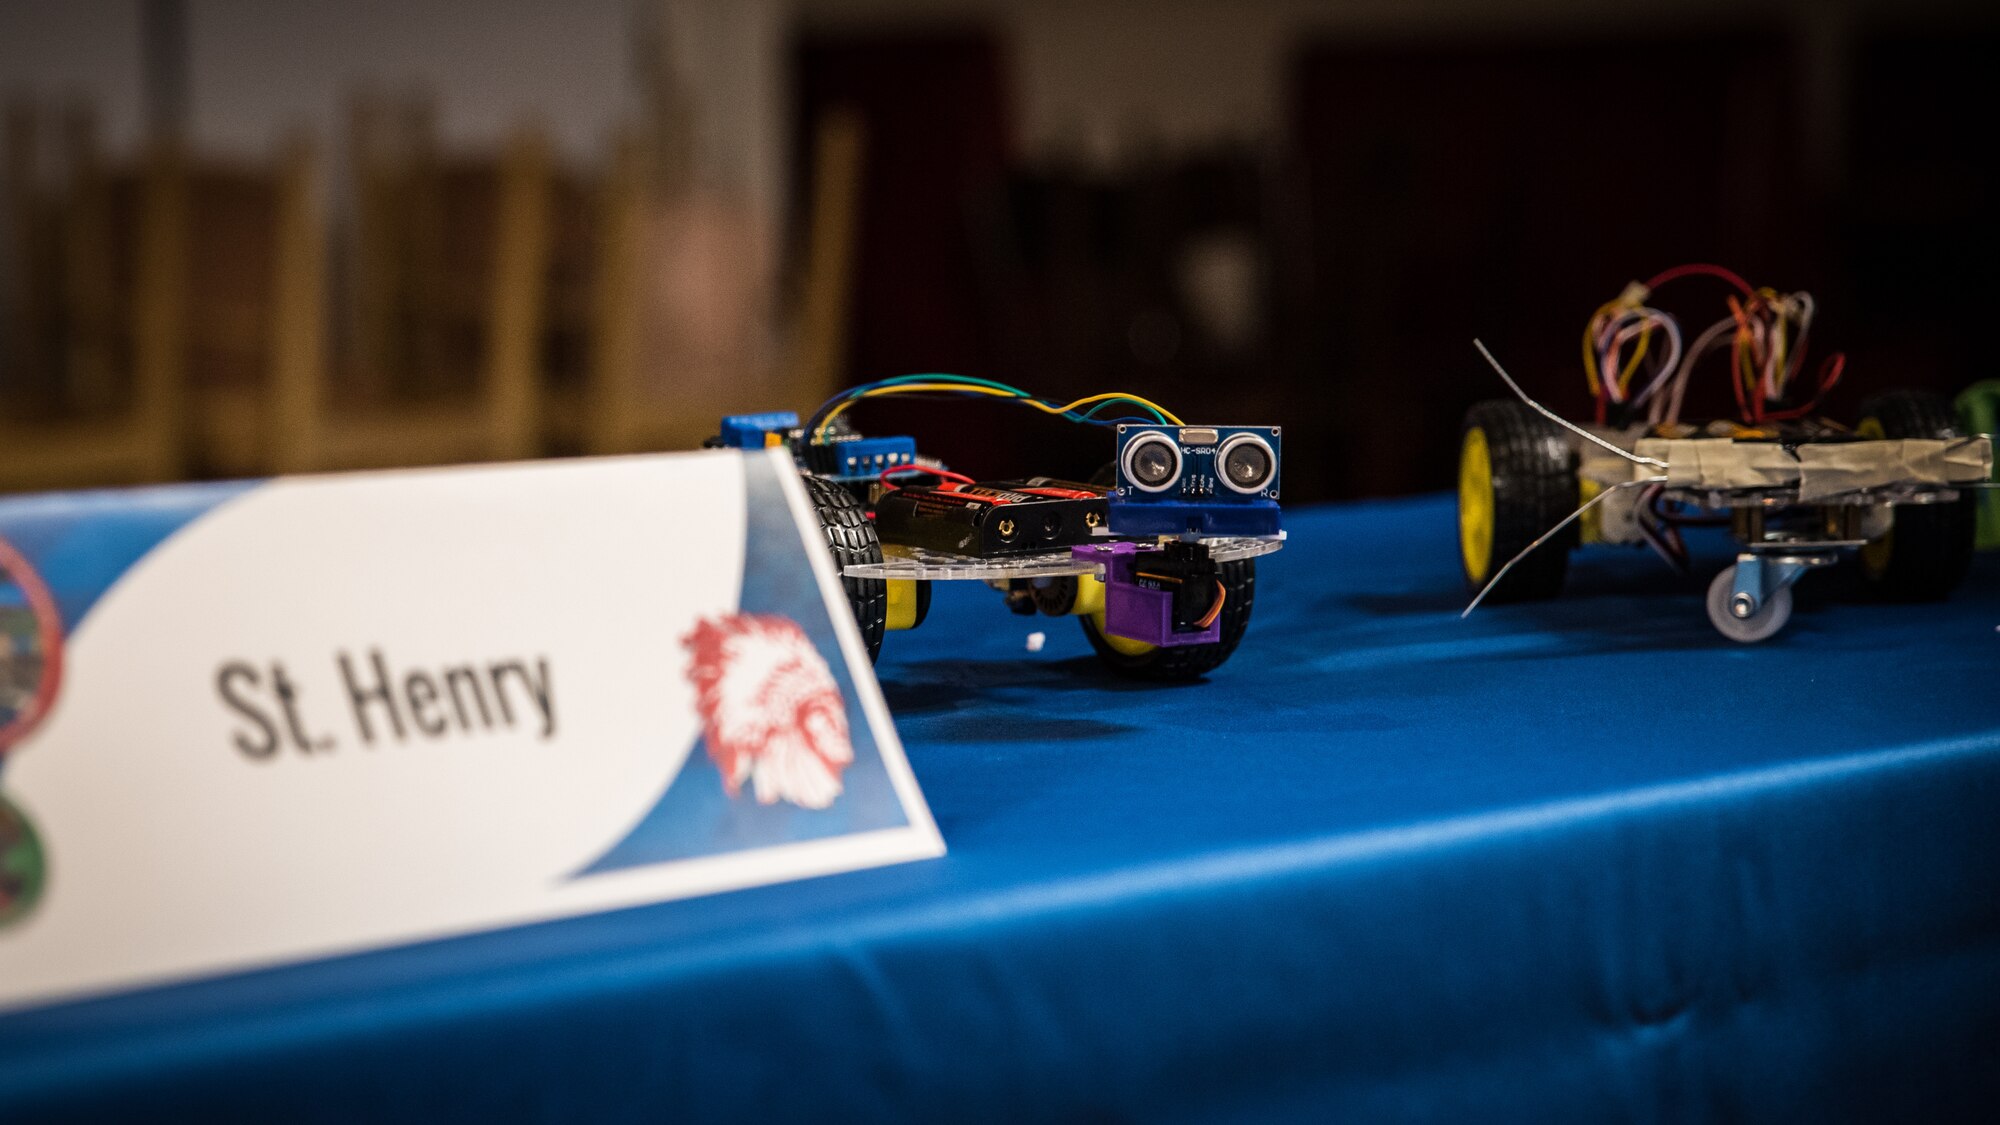 Autonomous vehicles, built by students from St. Henry High School, sit on a display table awaiting their races at the Air Force Research Laboratory's Full Throttle STEM at Eldora Speedway May 14. (U.S. Air Force photo/Richard Eldridge)